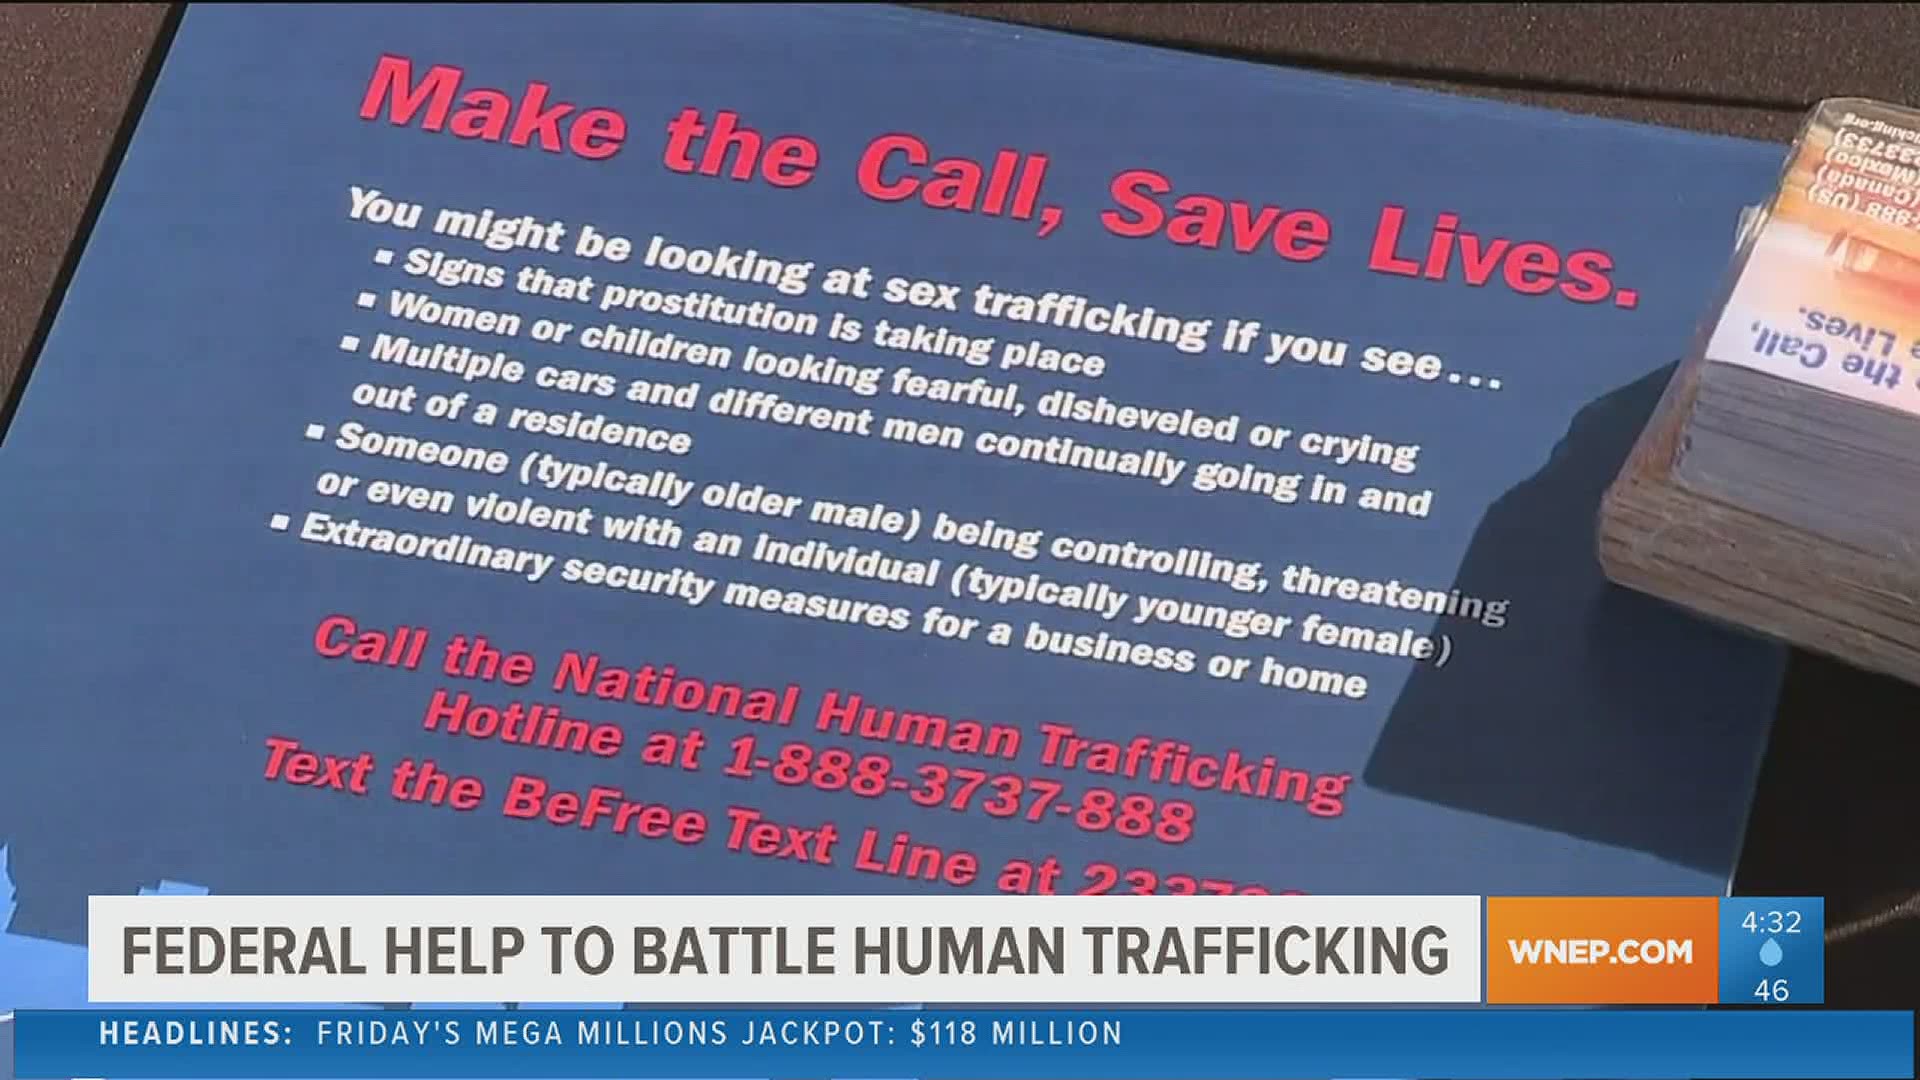 Federal grant for human trafficking victims wnep pic